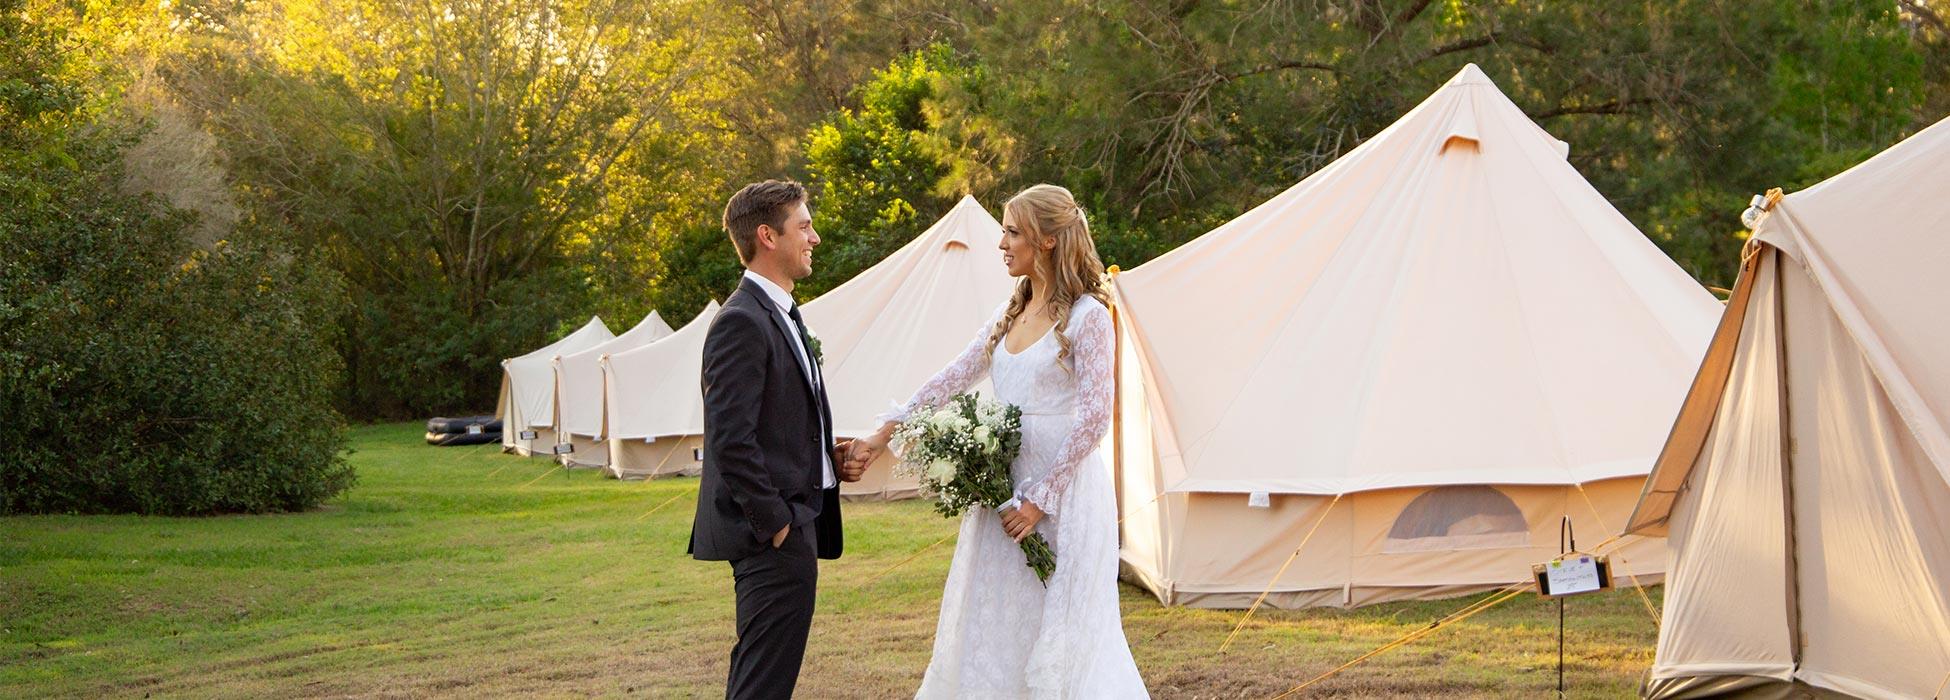 couple getting married with bell tents in background